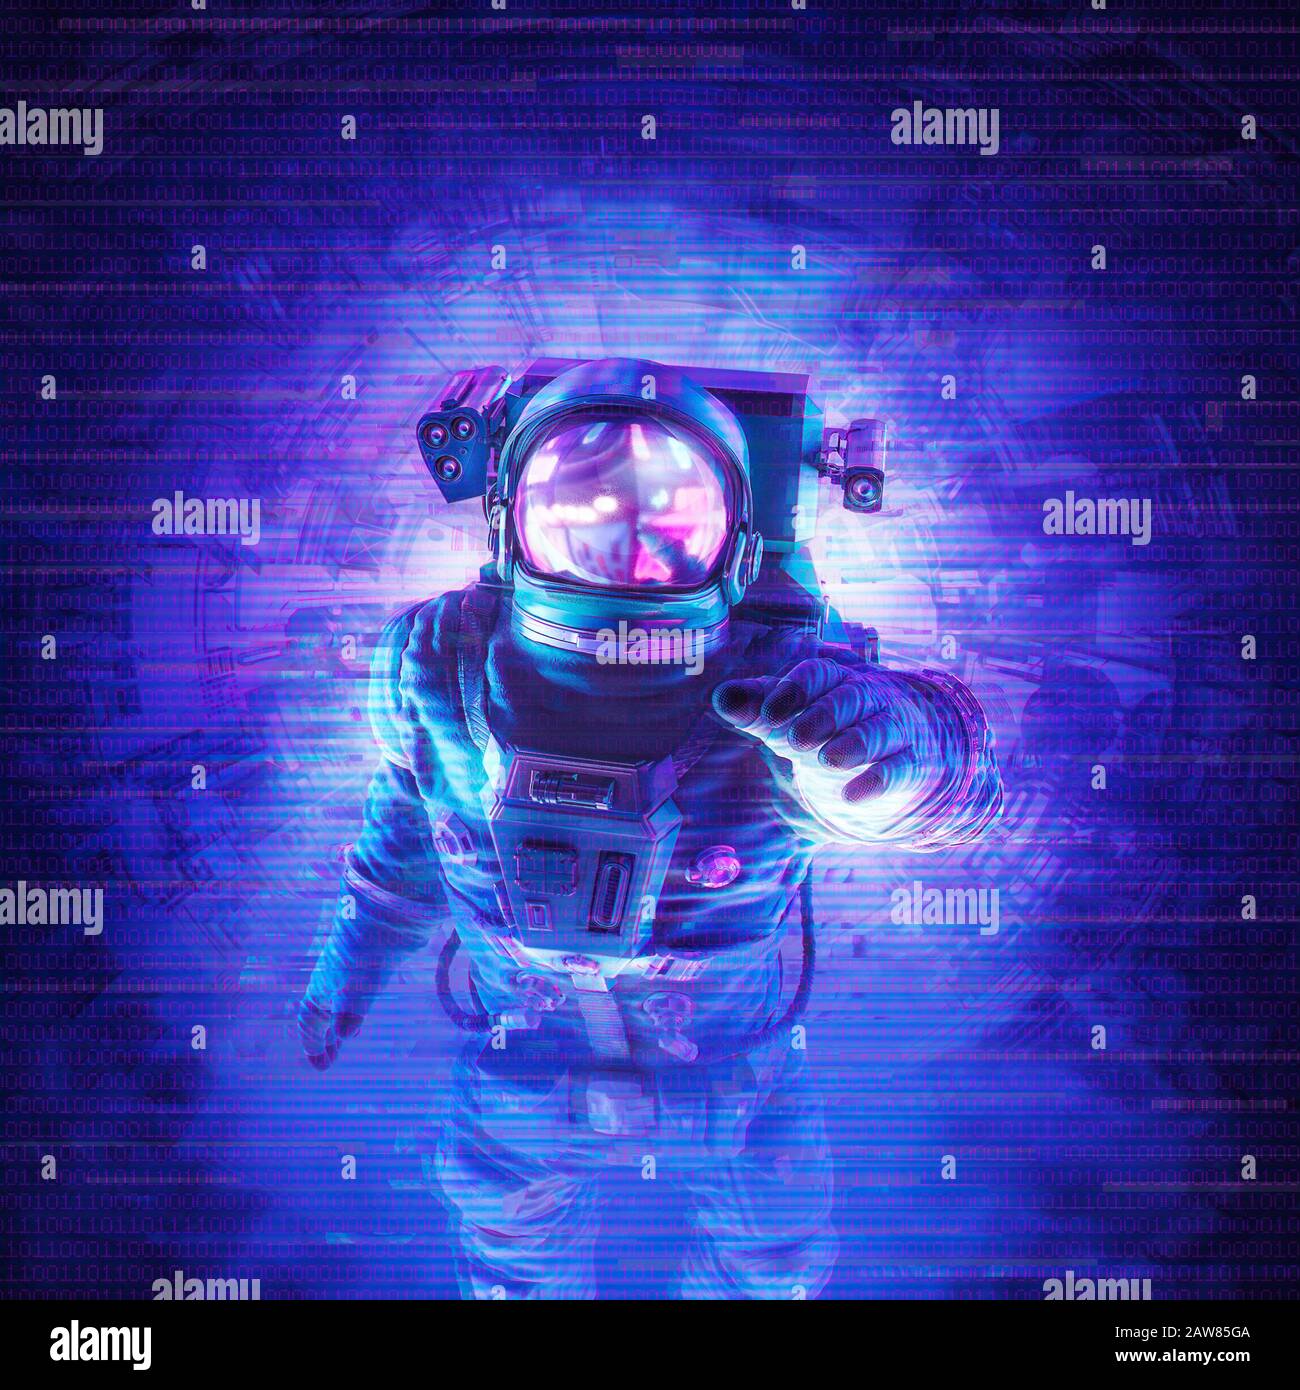 Transmission signal error / 3D illustration of science fiction scene with astronaut sending message through glitchy video feed Stock Photo